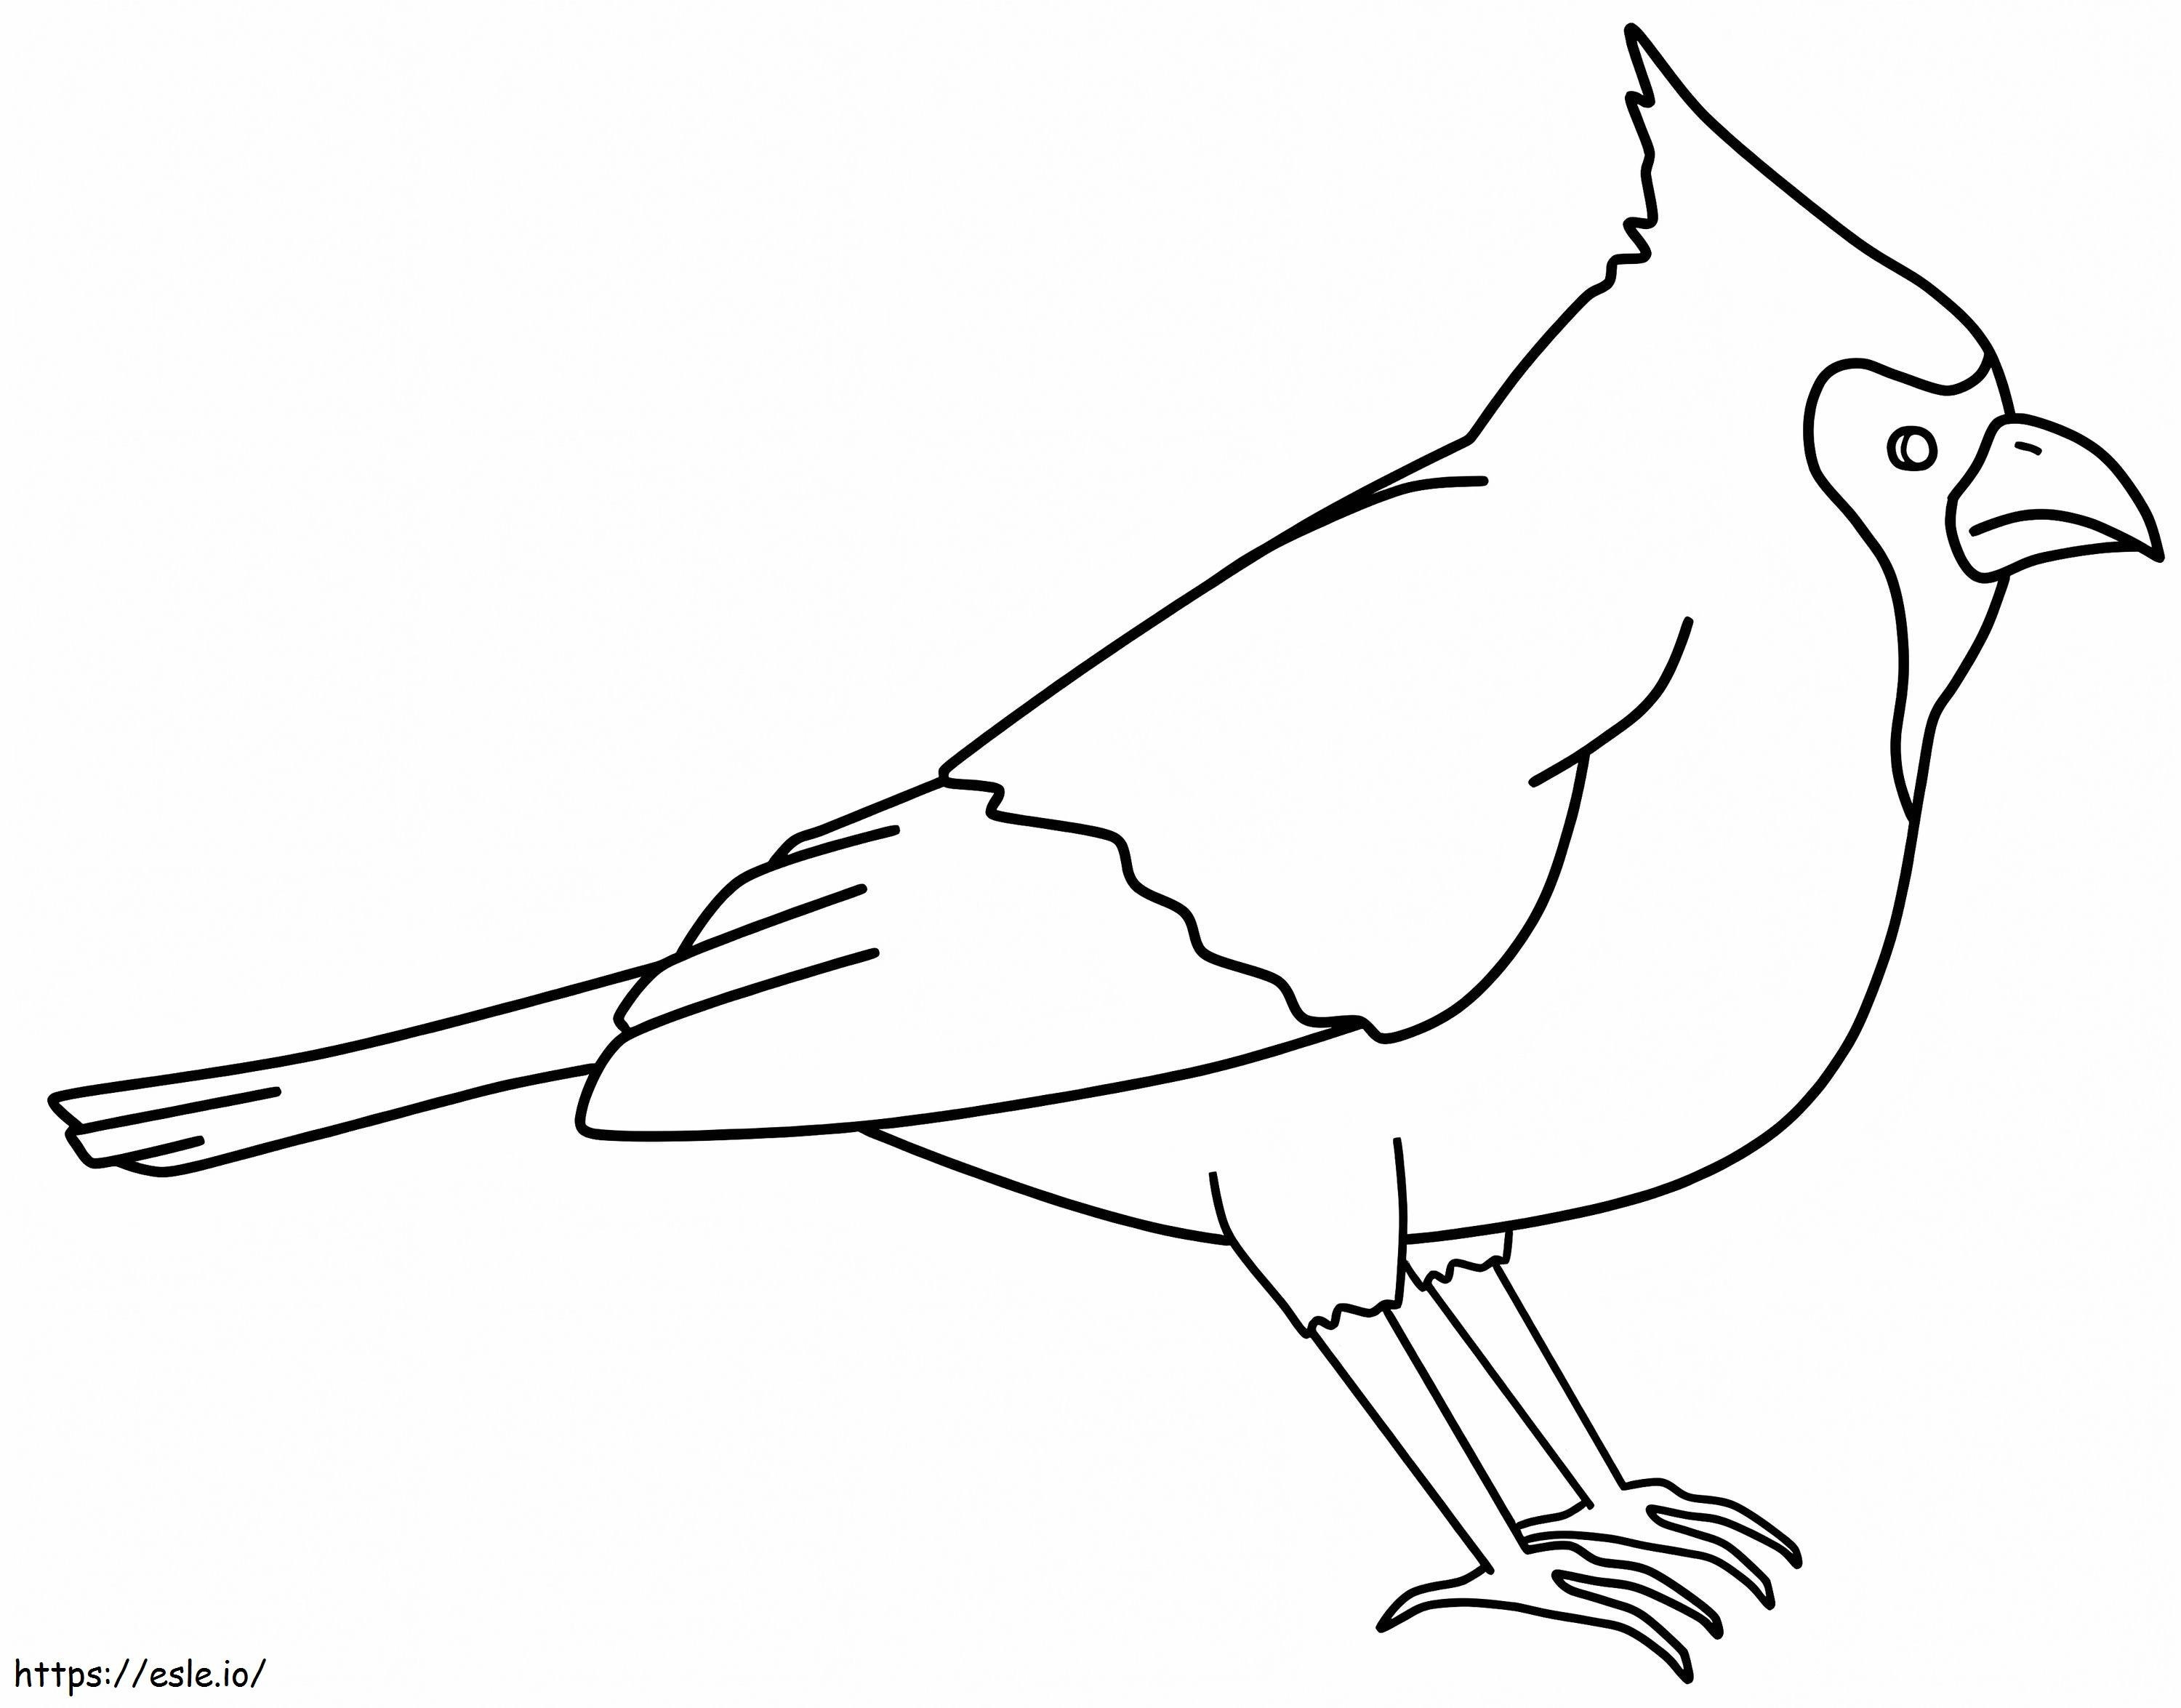 Easy Cardinal coloring page